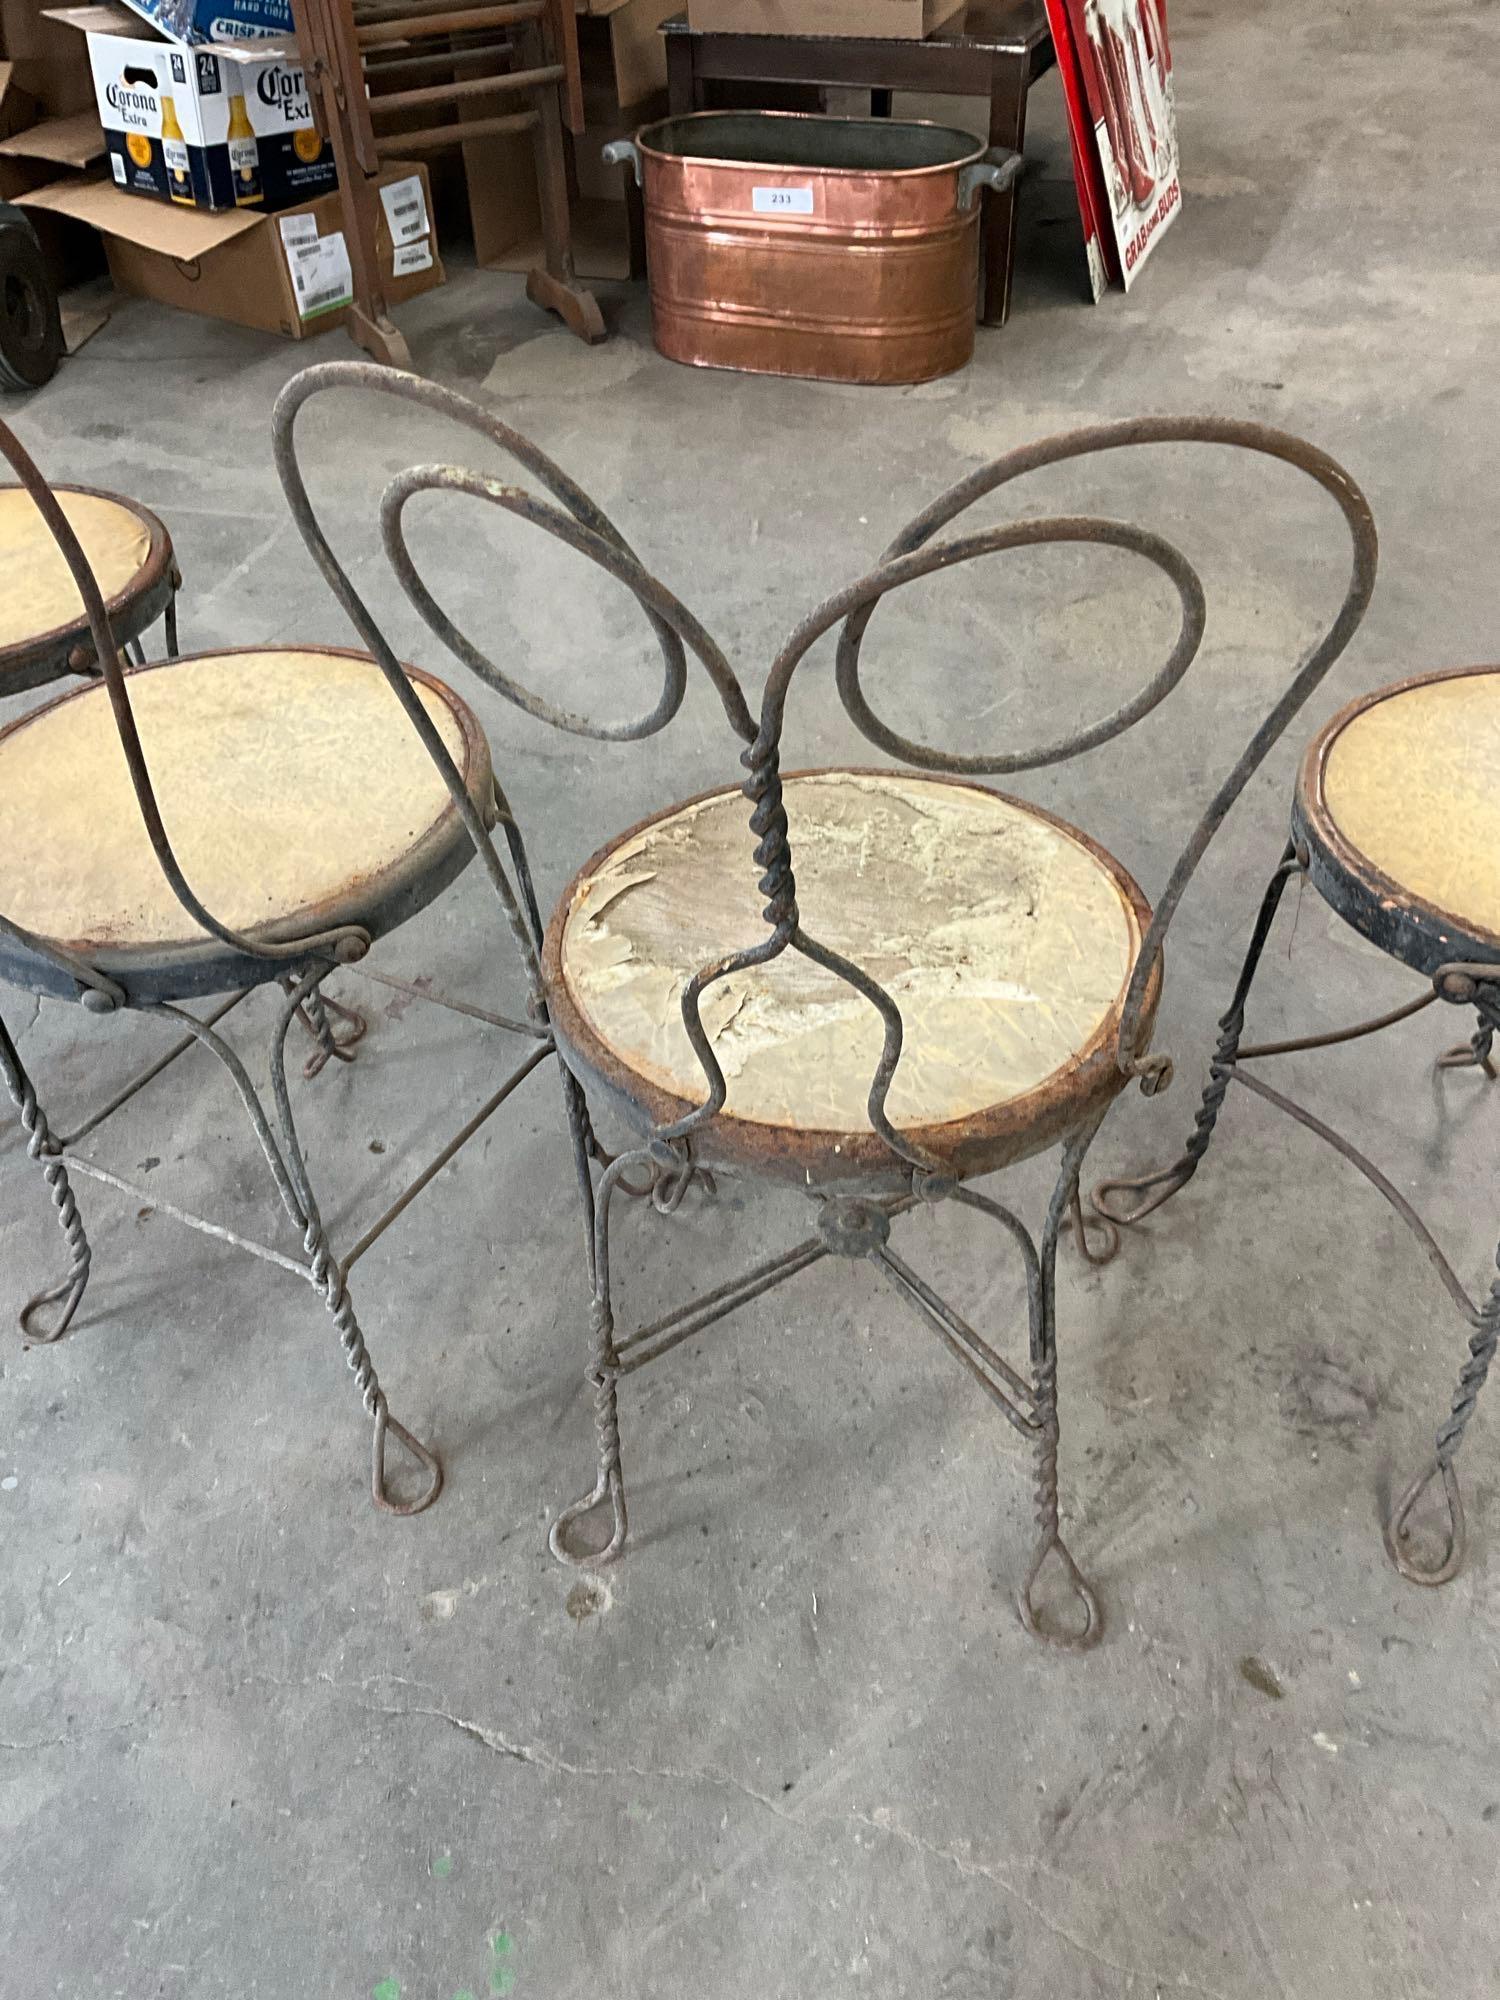 (4) twisted metal ice cream chairs